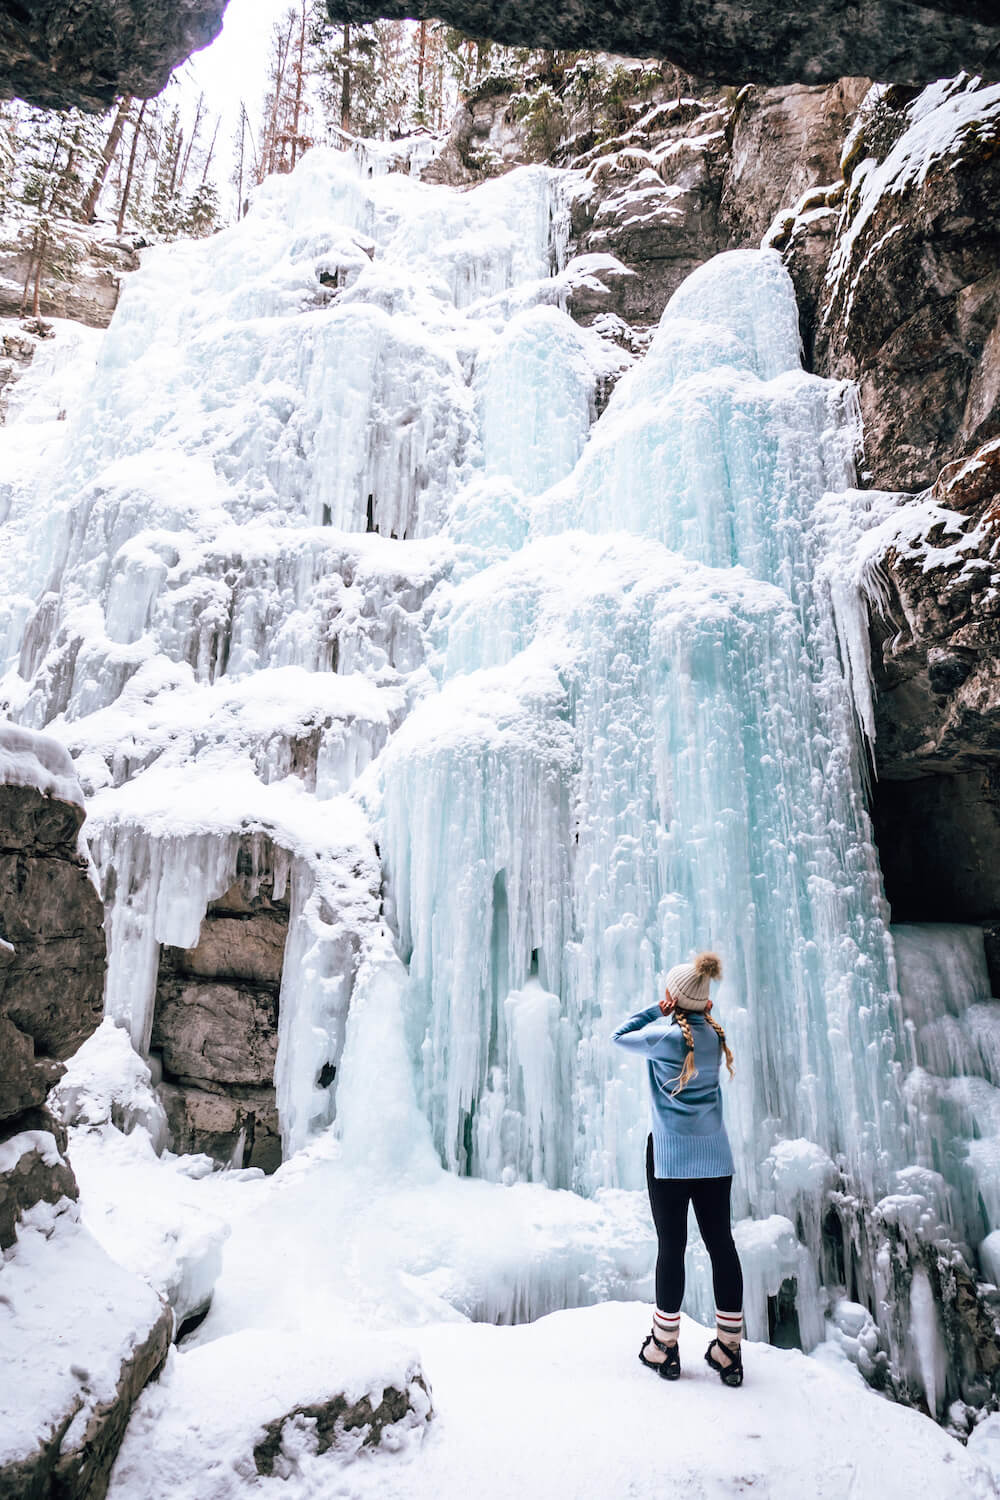 Planning a trip to Jasper National Park soon? Here's a local's guide to some of the best things to do in Jasper. From hikes and trails to adventure sports, family friendly excursions, dining experiences and more. You won't want to miss this guide of the best things to do and places to see in Jasper. Pictured here: Maligne Canyon Ice Walk